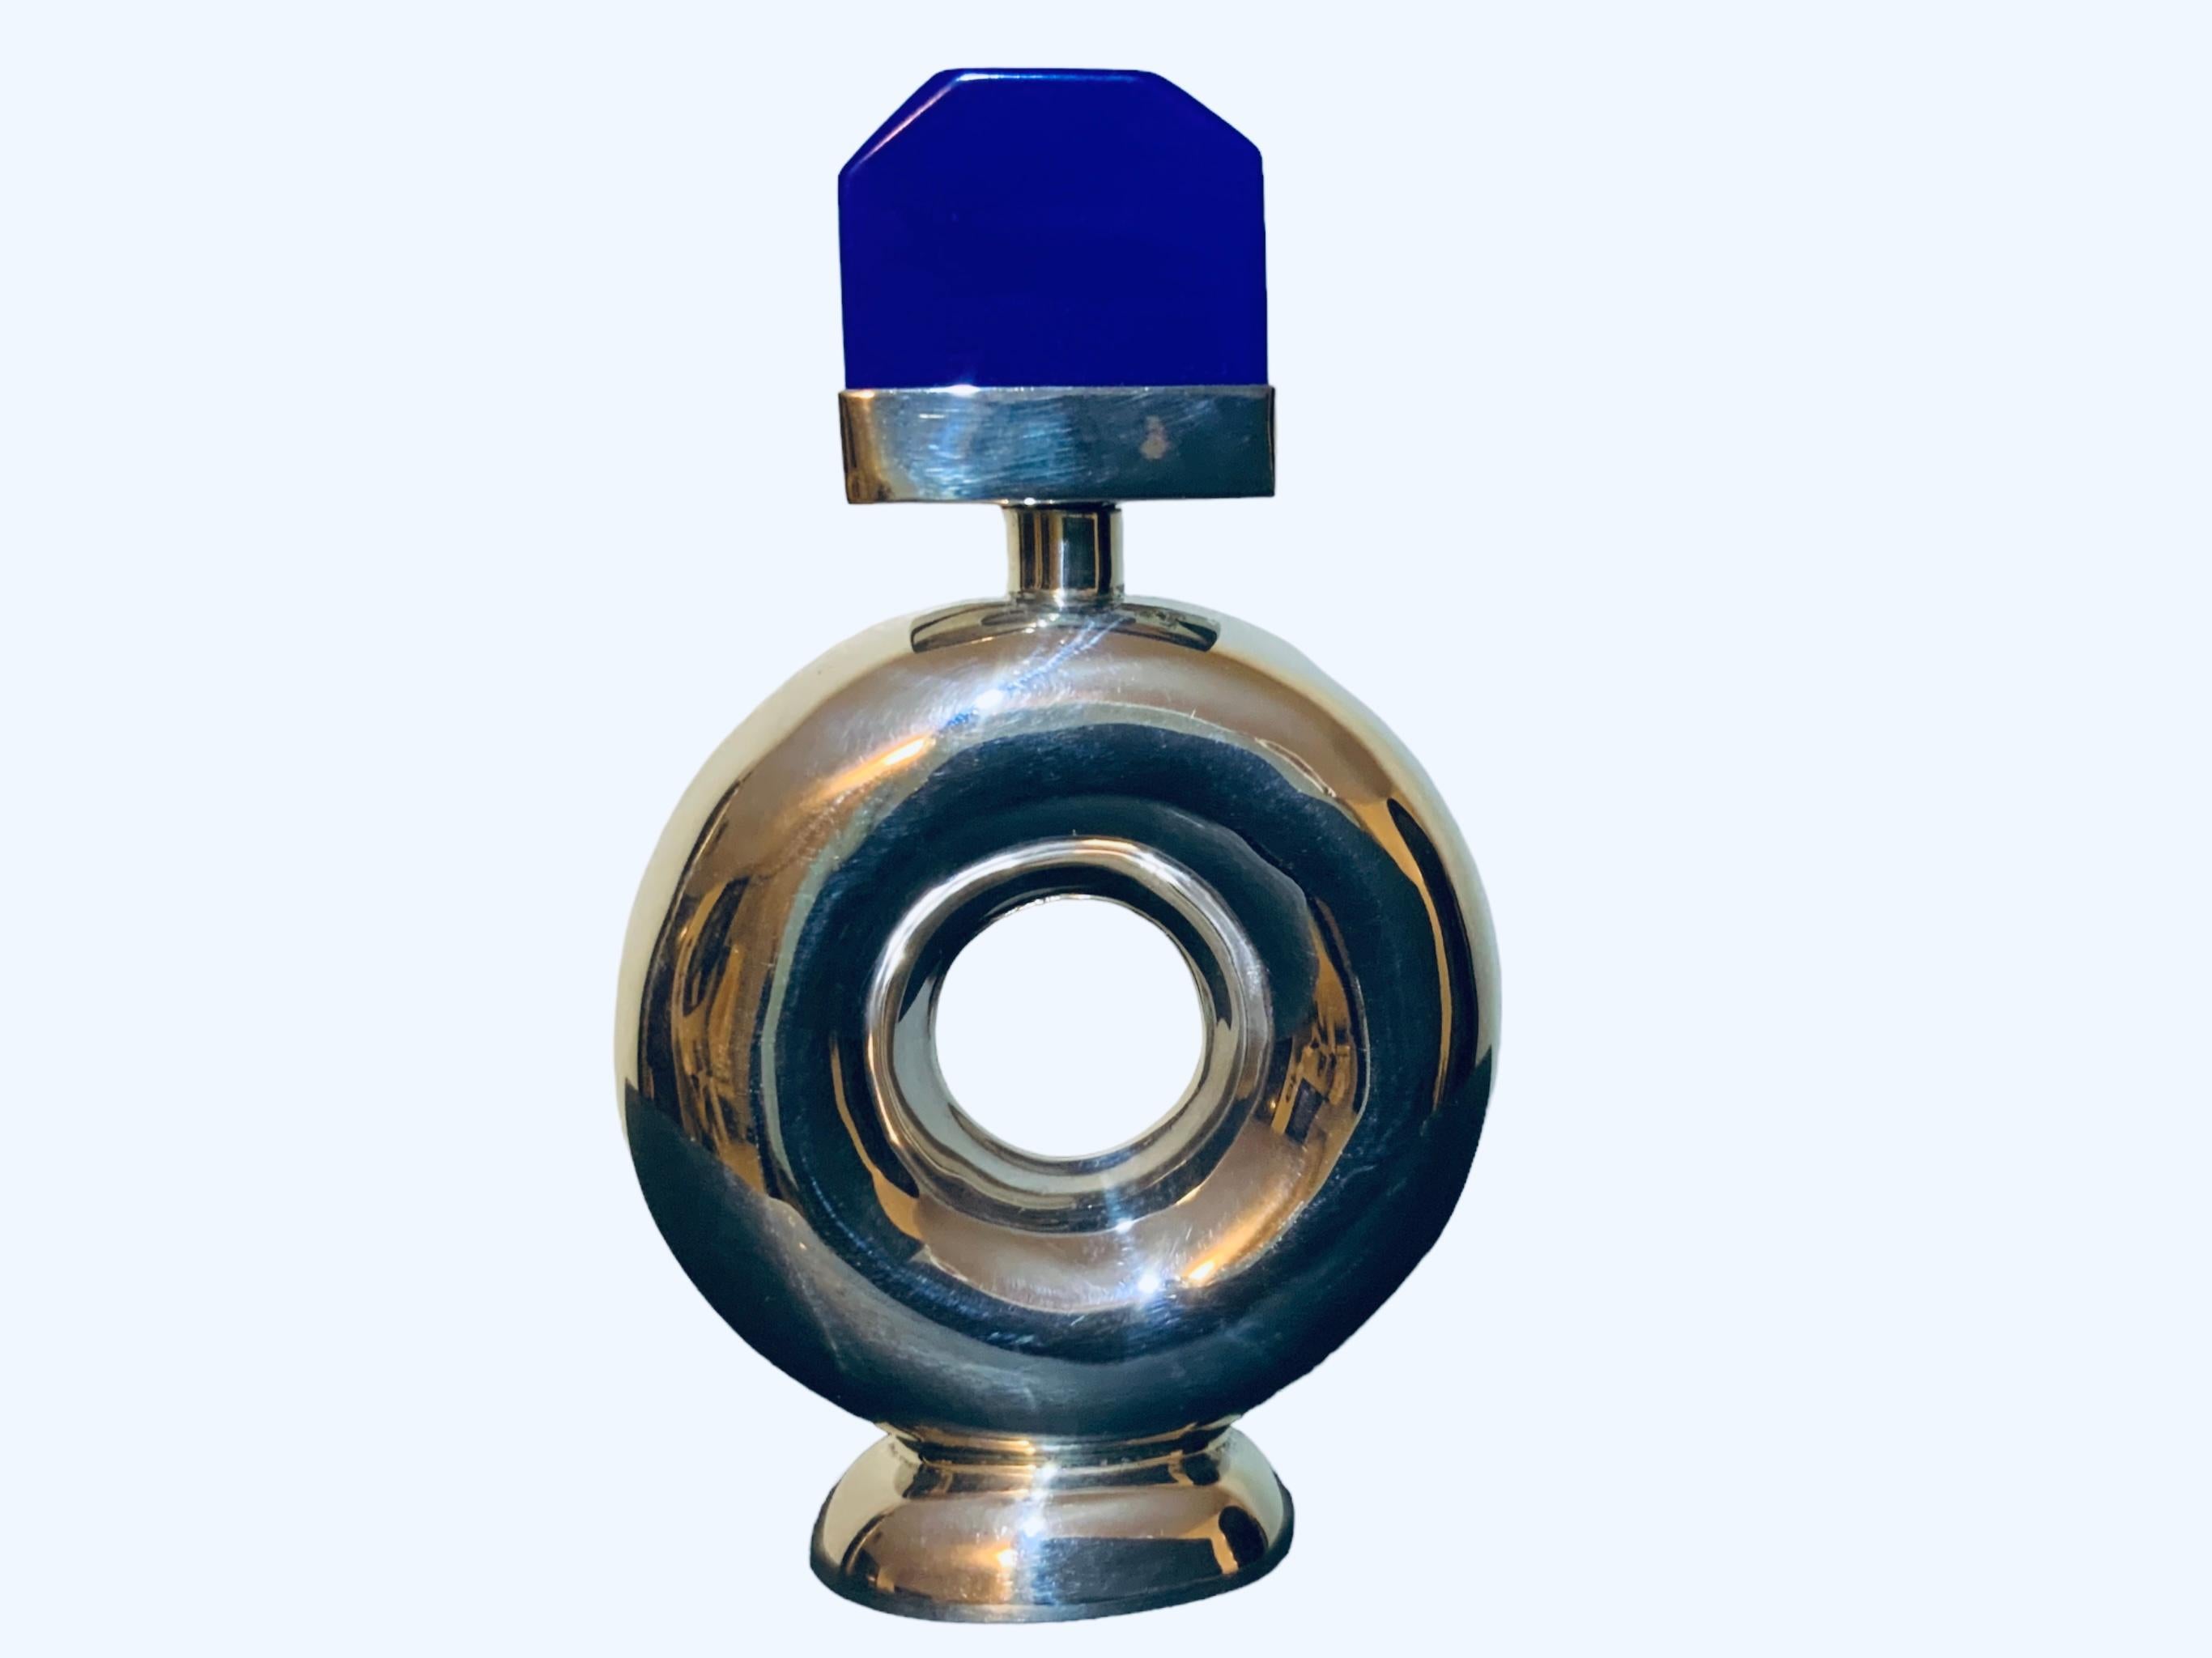 This is a 925 sterling silver and blue stone perfume bottle. It depicts a wide silver ring shaped bottle with an hexagonal shaped cobalt blue stone with sterling silver base serve as a stopper. It is hallmarked 925.